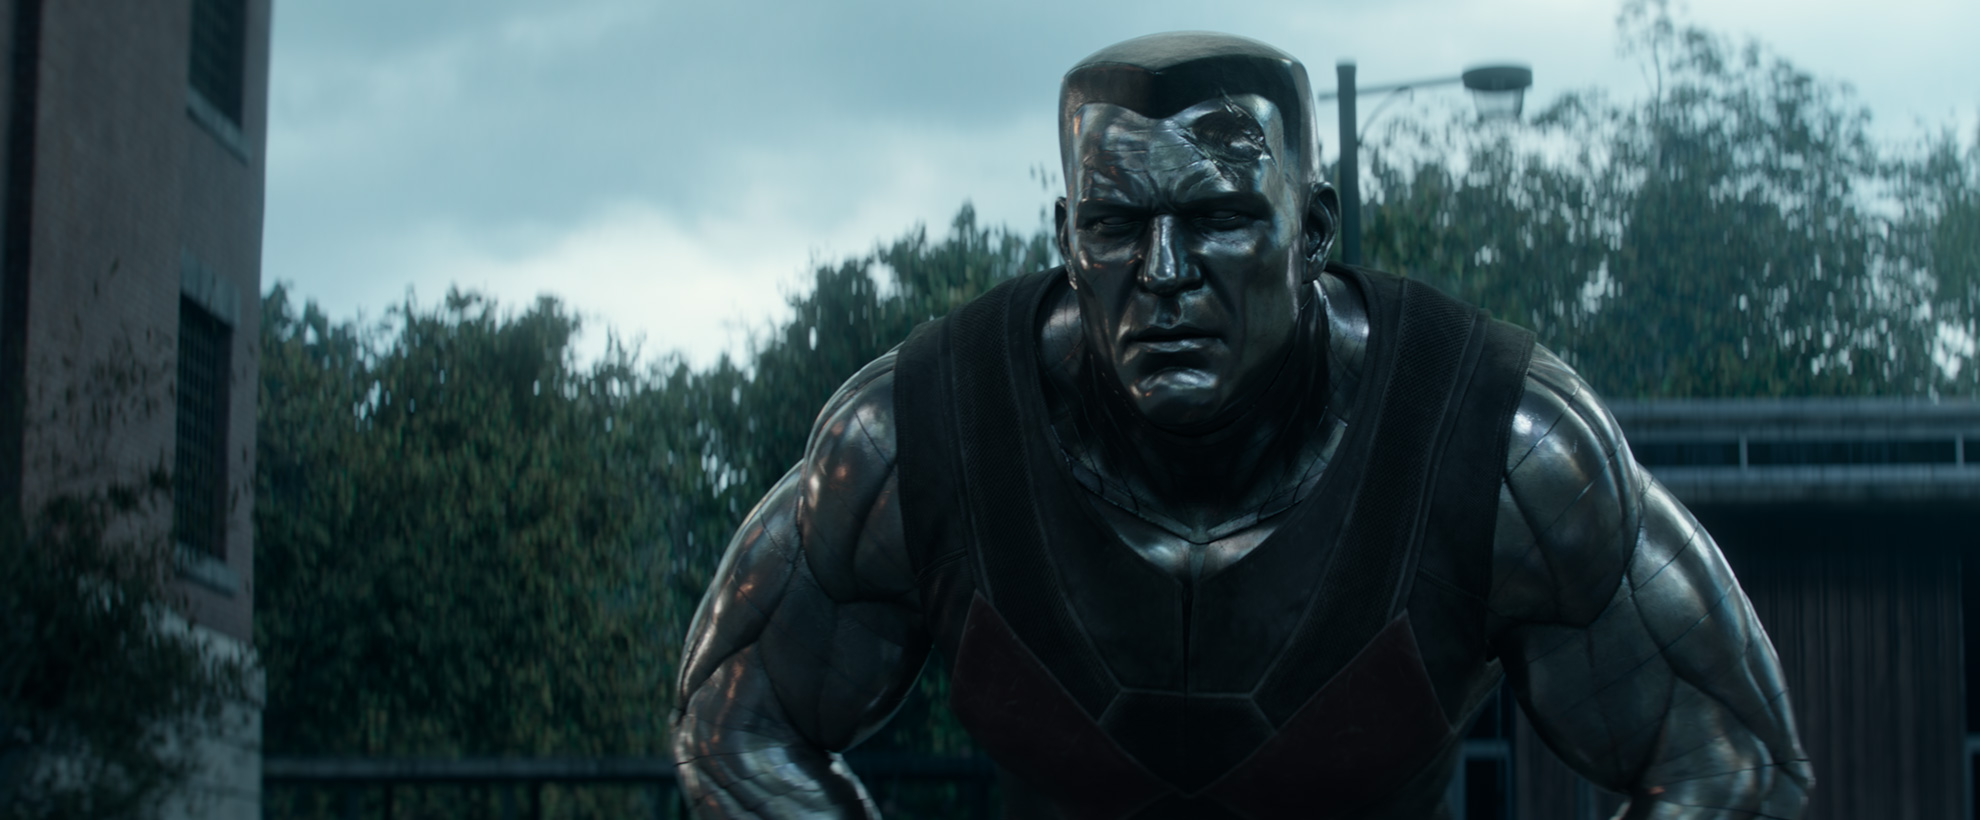 Colossus from Deadpool 2